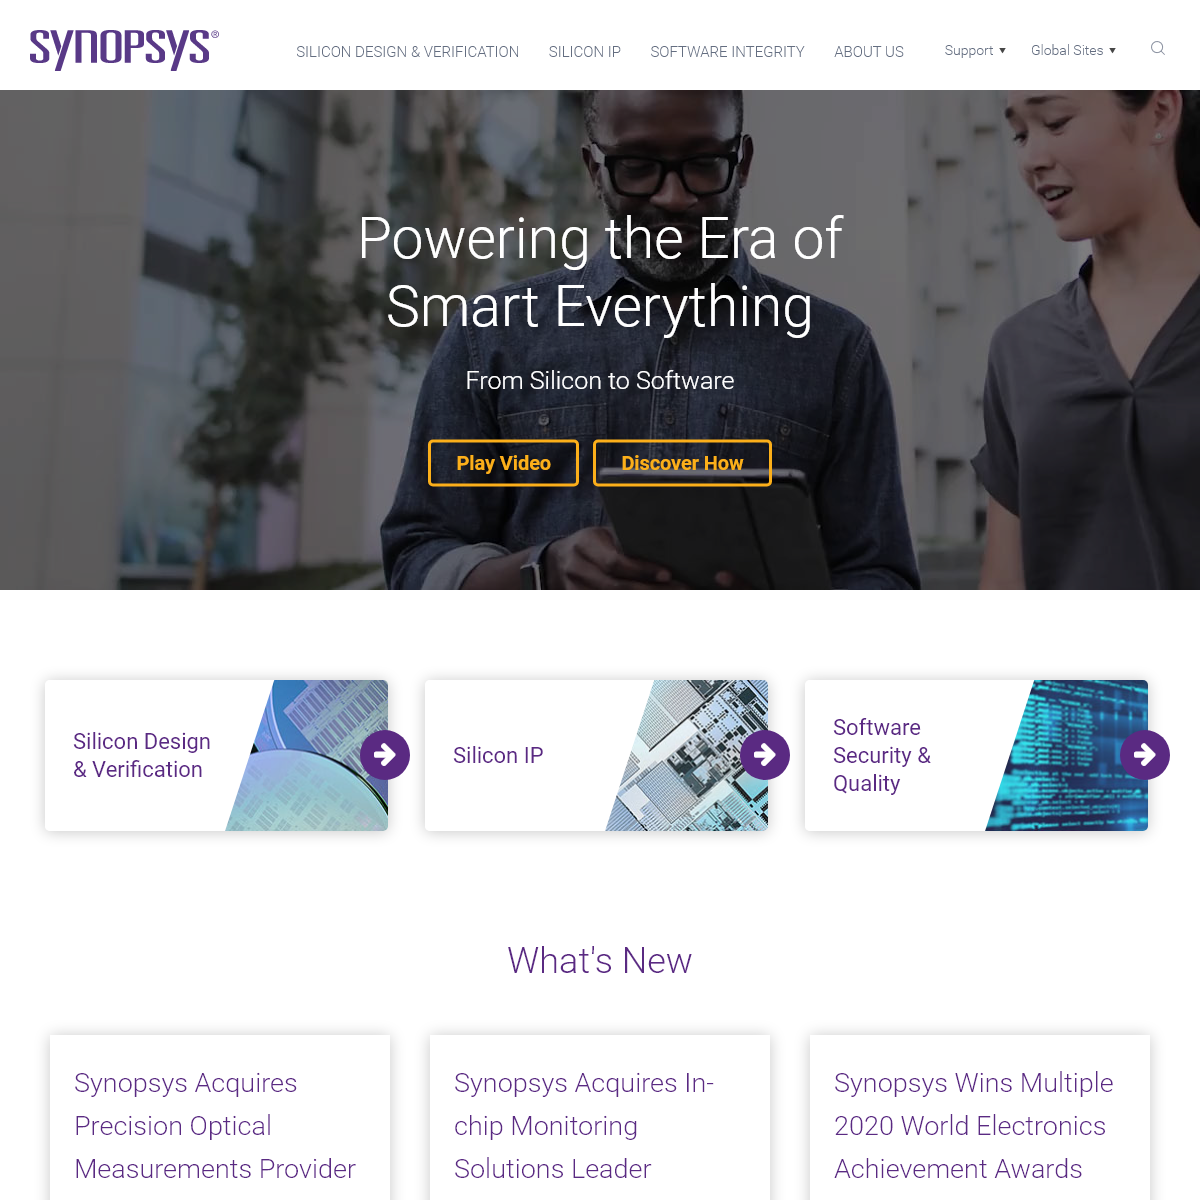 Synopsys - EDA Tools, Semiconductor IP and Application Security Solutions